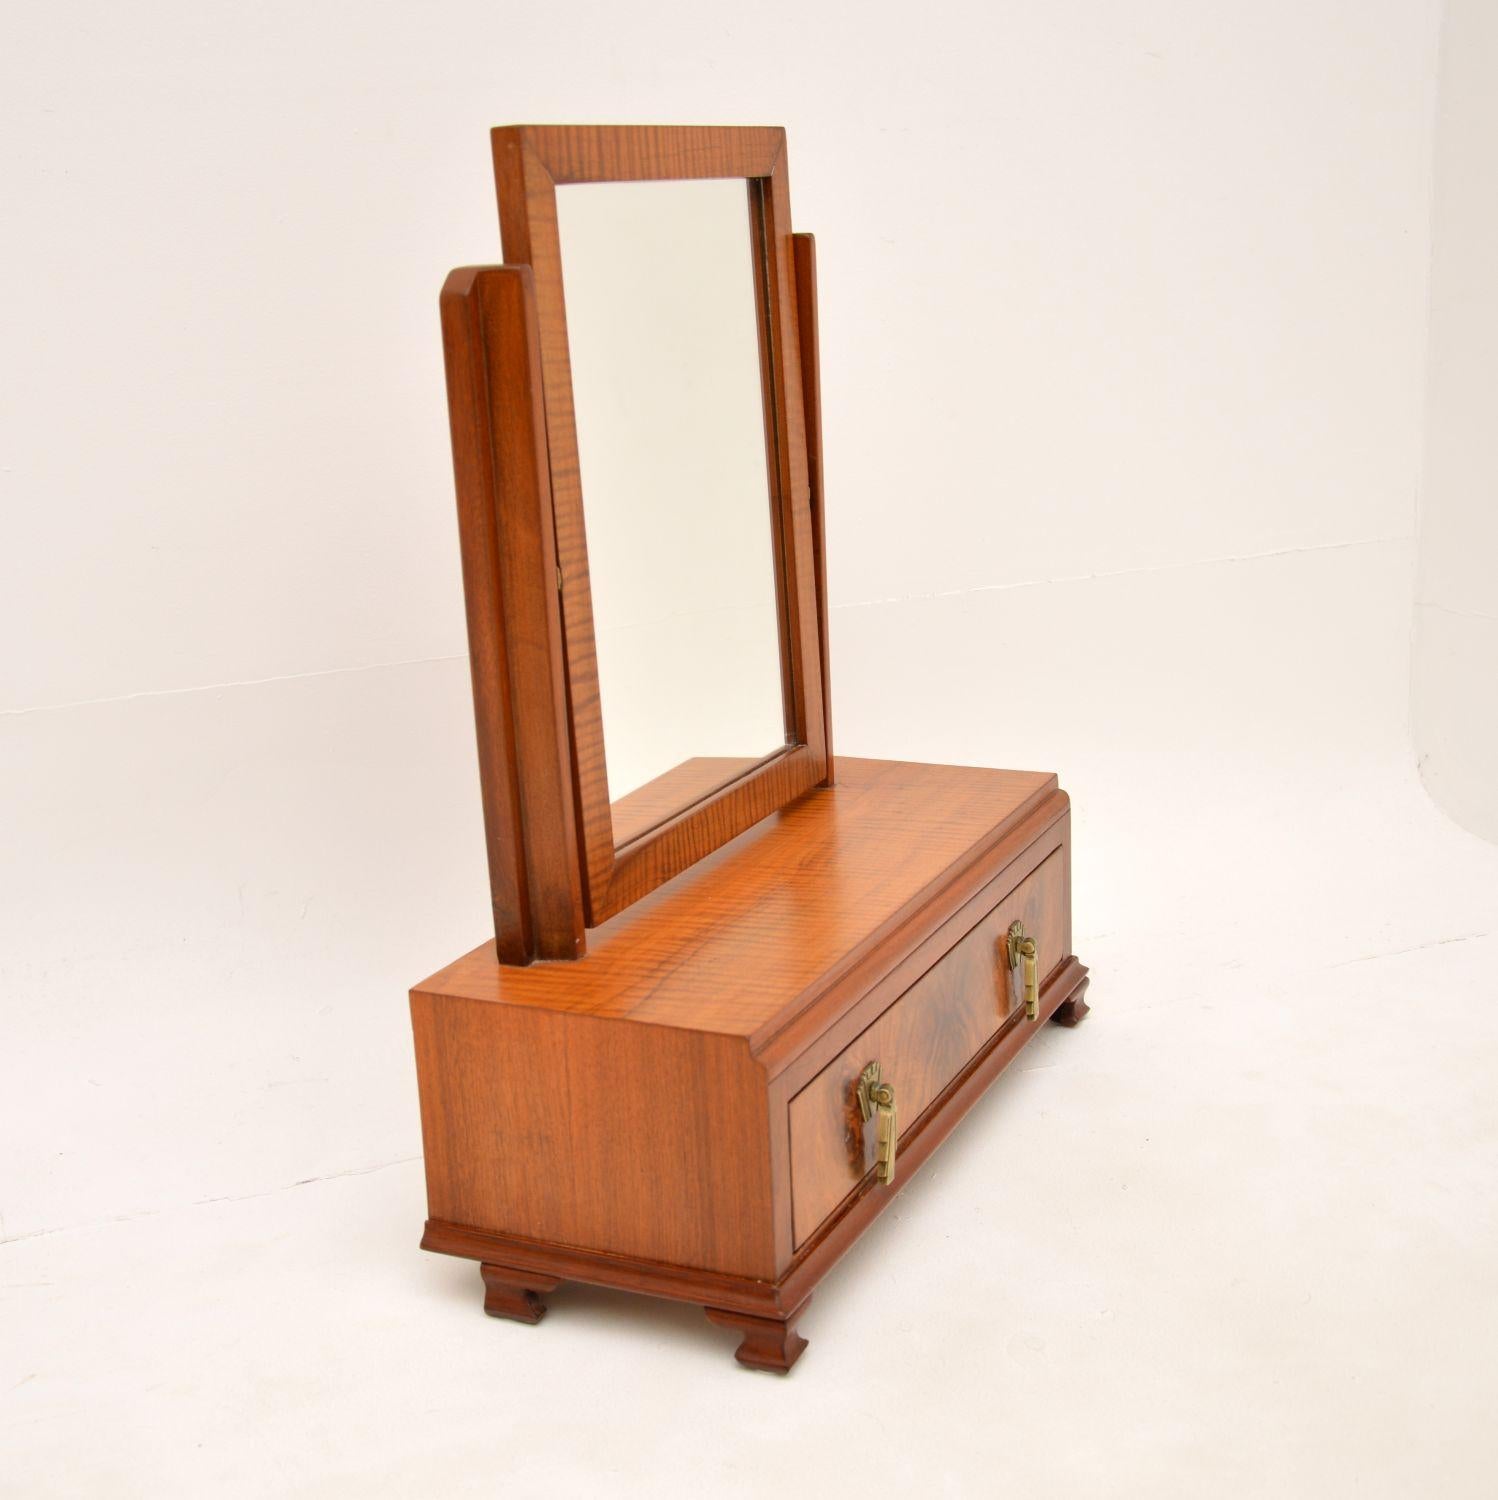 A stunning Art Deco period vanity mirror in walnut. This was made in England, it dates from the 1920-1930s.

The quality is amazing and this is a very useful item. It is perfect for use on top of a dressing table or chest of drawers. The walnut has